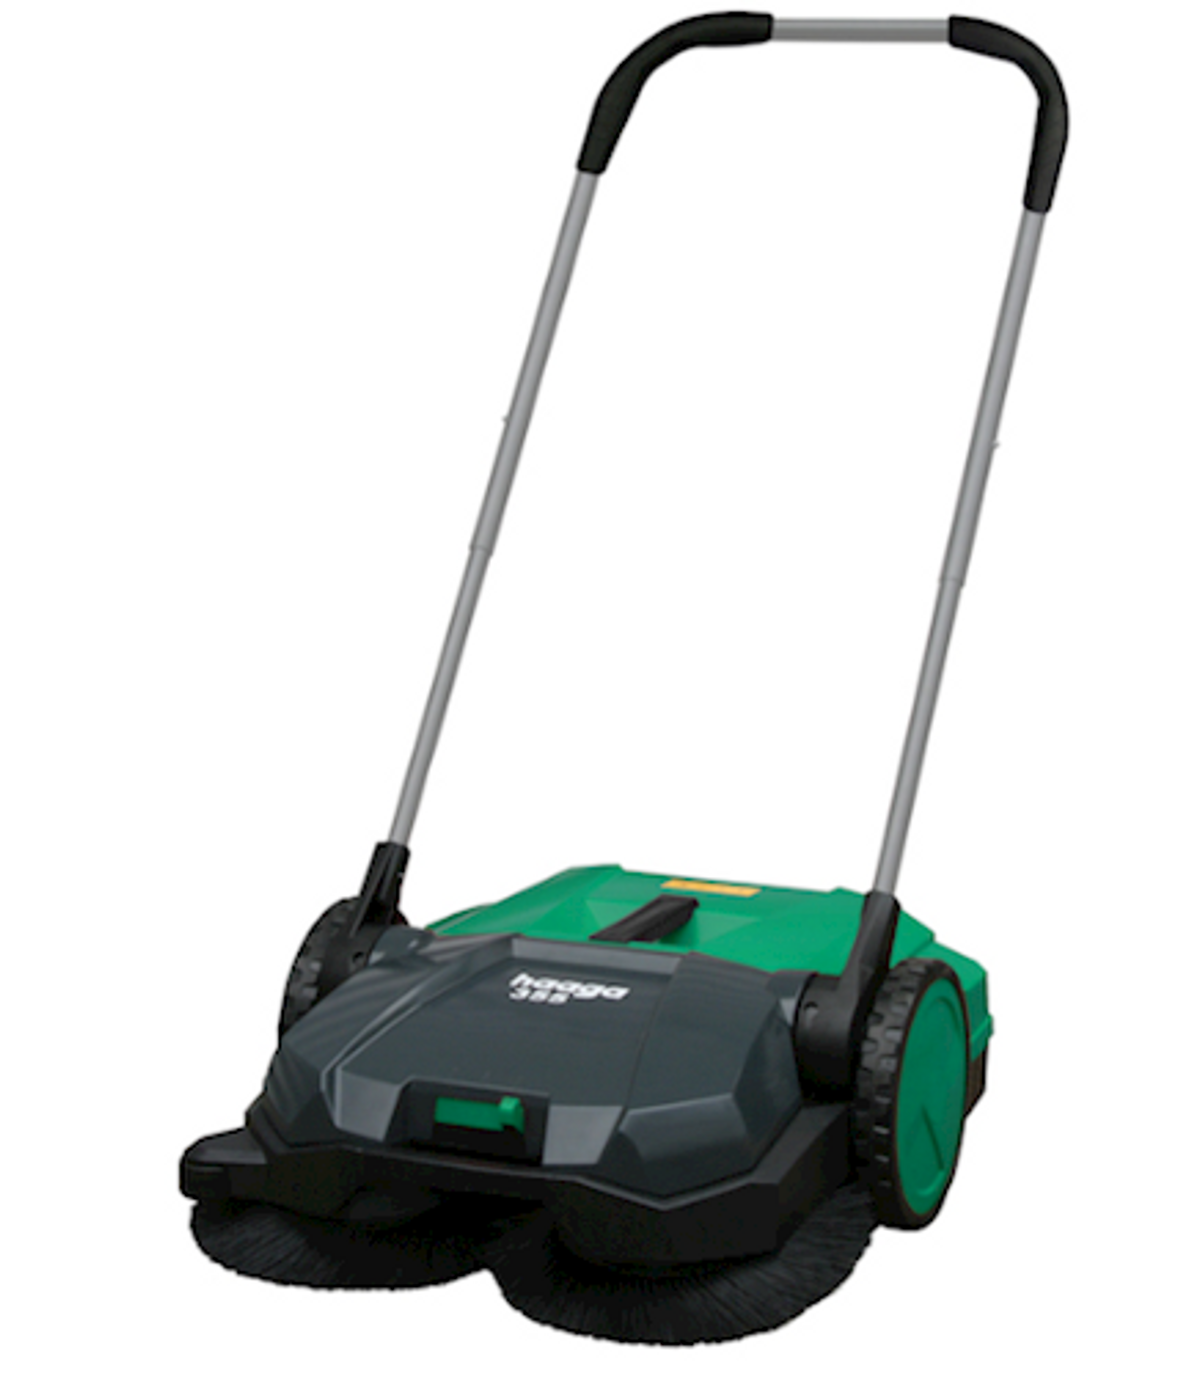 Bissell Commercial BG-355 Deluxe Turbo 21" Triple Brush Manual Power Sweeper